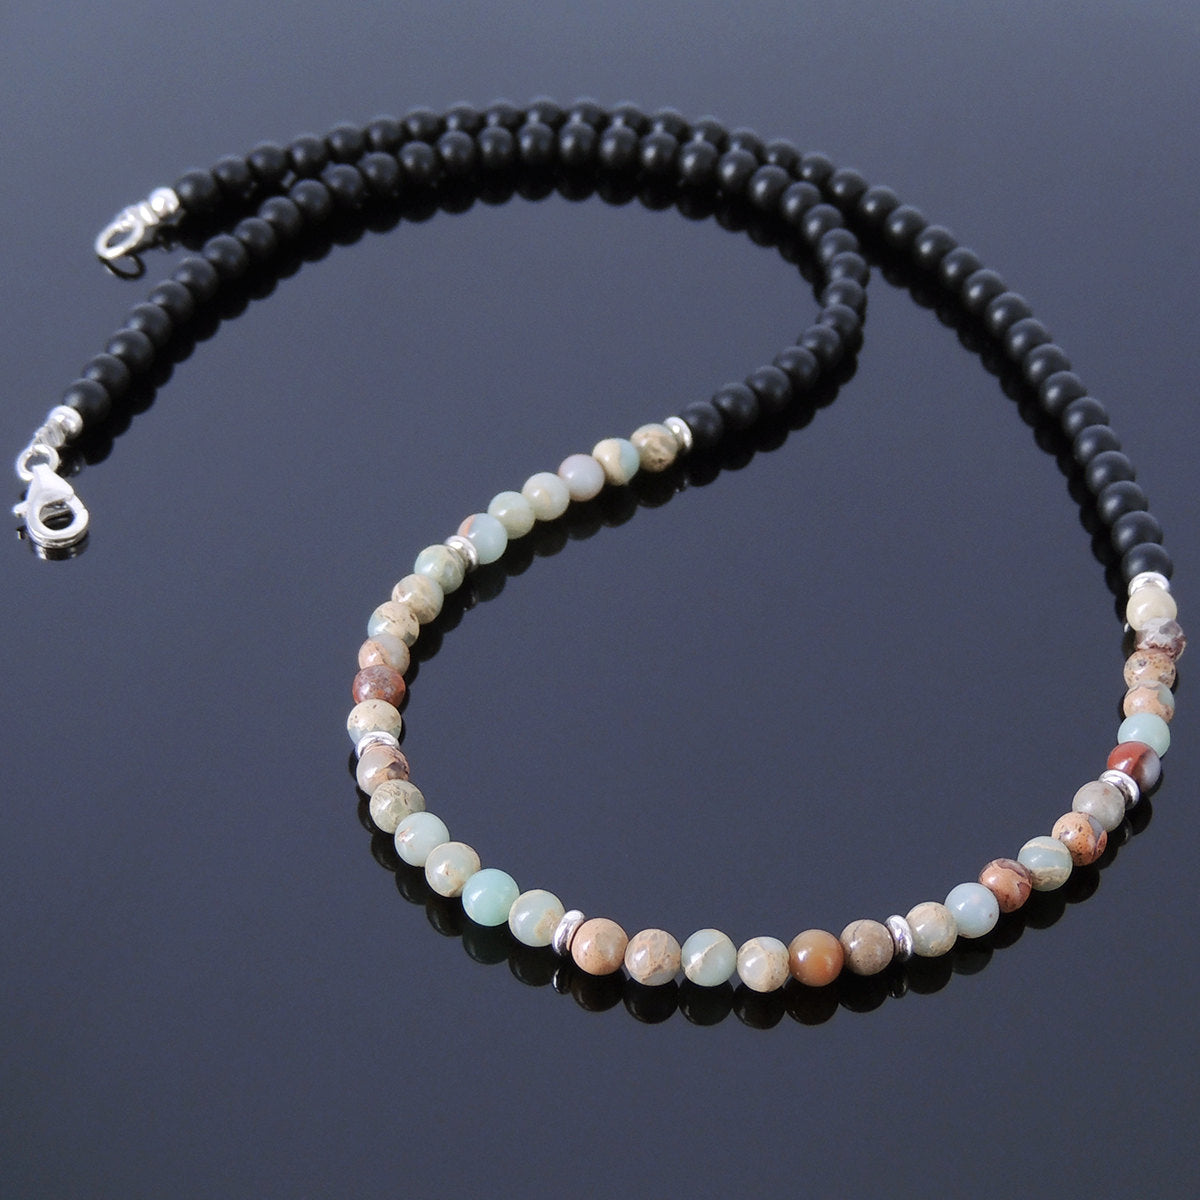 4mm Jasper & Matte Black Onyx Healing Gemstone Necklace with S925 Sterling Silver Spacer Beads & Clasp - Handmade by Gem & Silver NK018